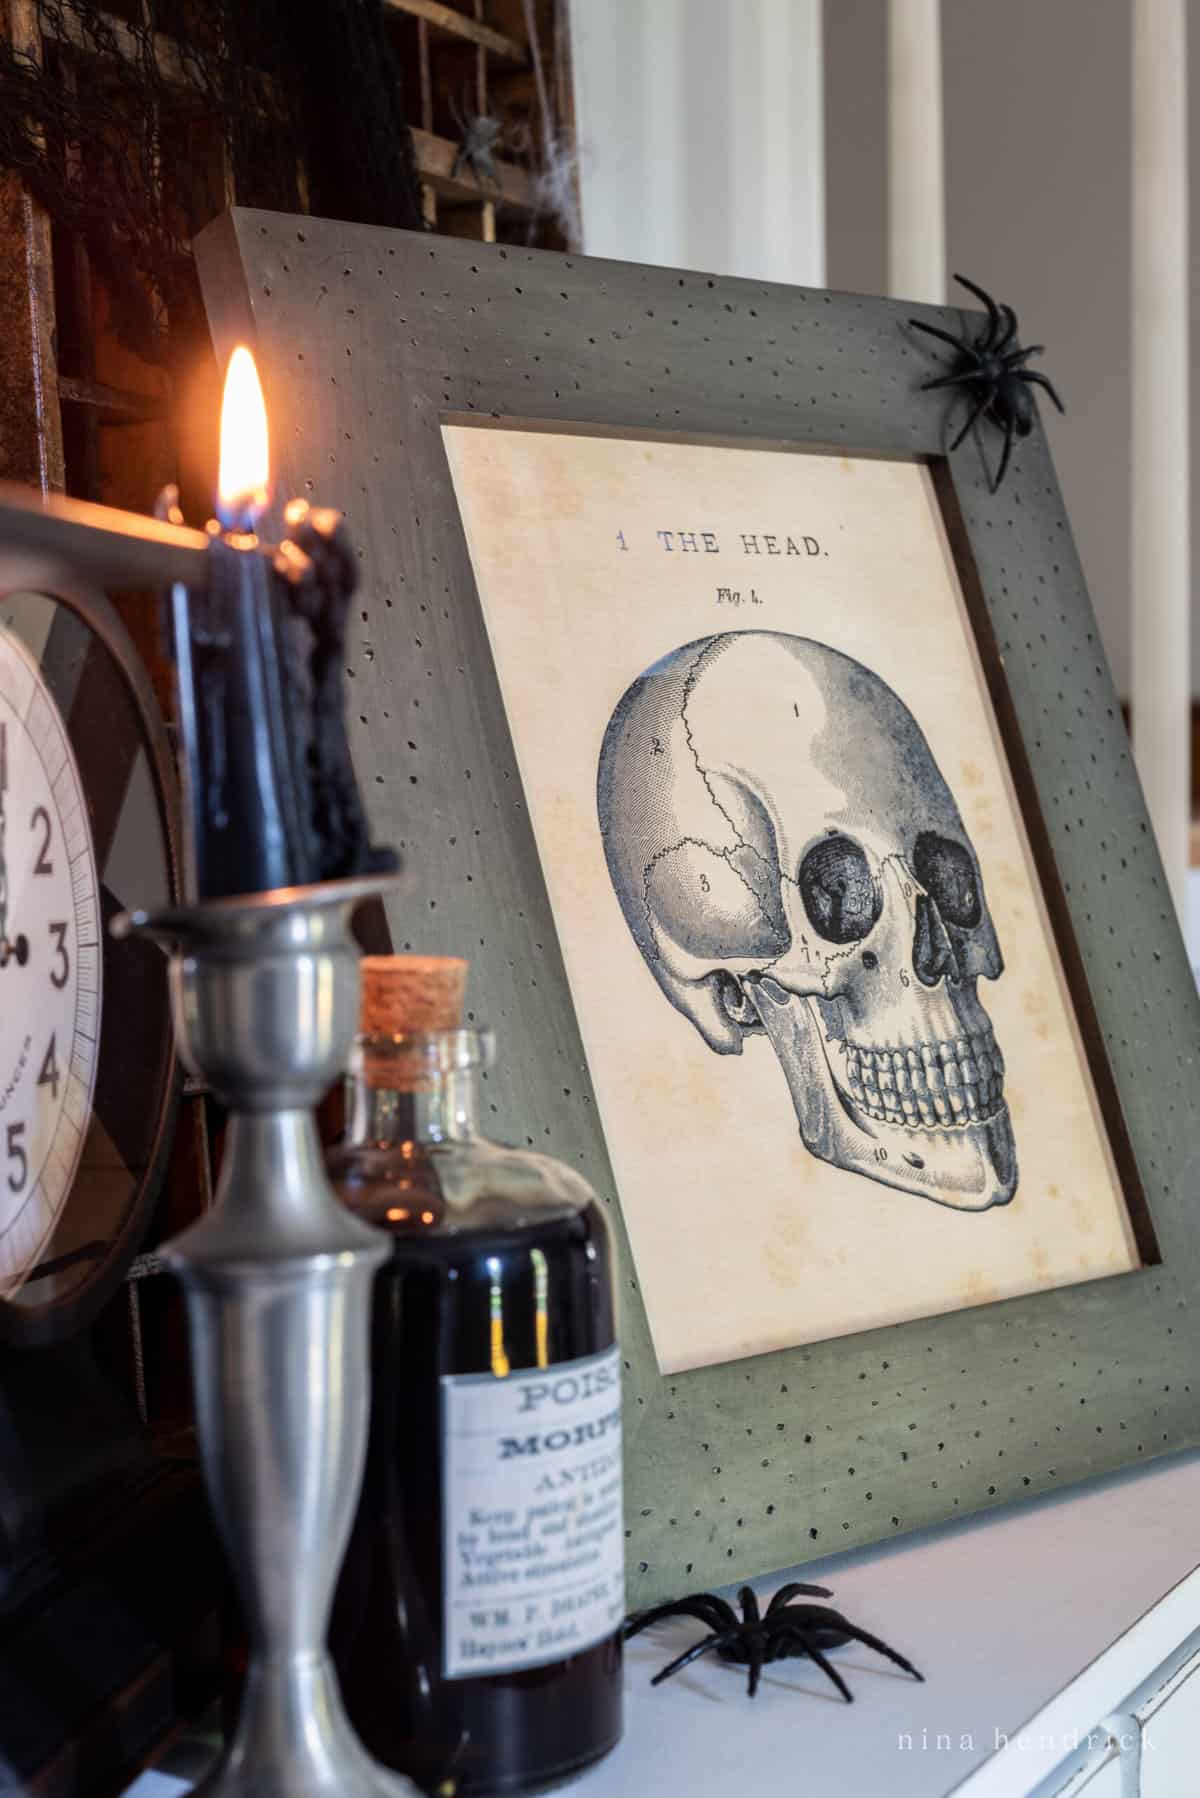 Get into the spooky spirit with this haunting framed print featuring a skull and candle on a mantle. 